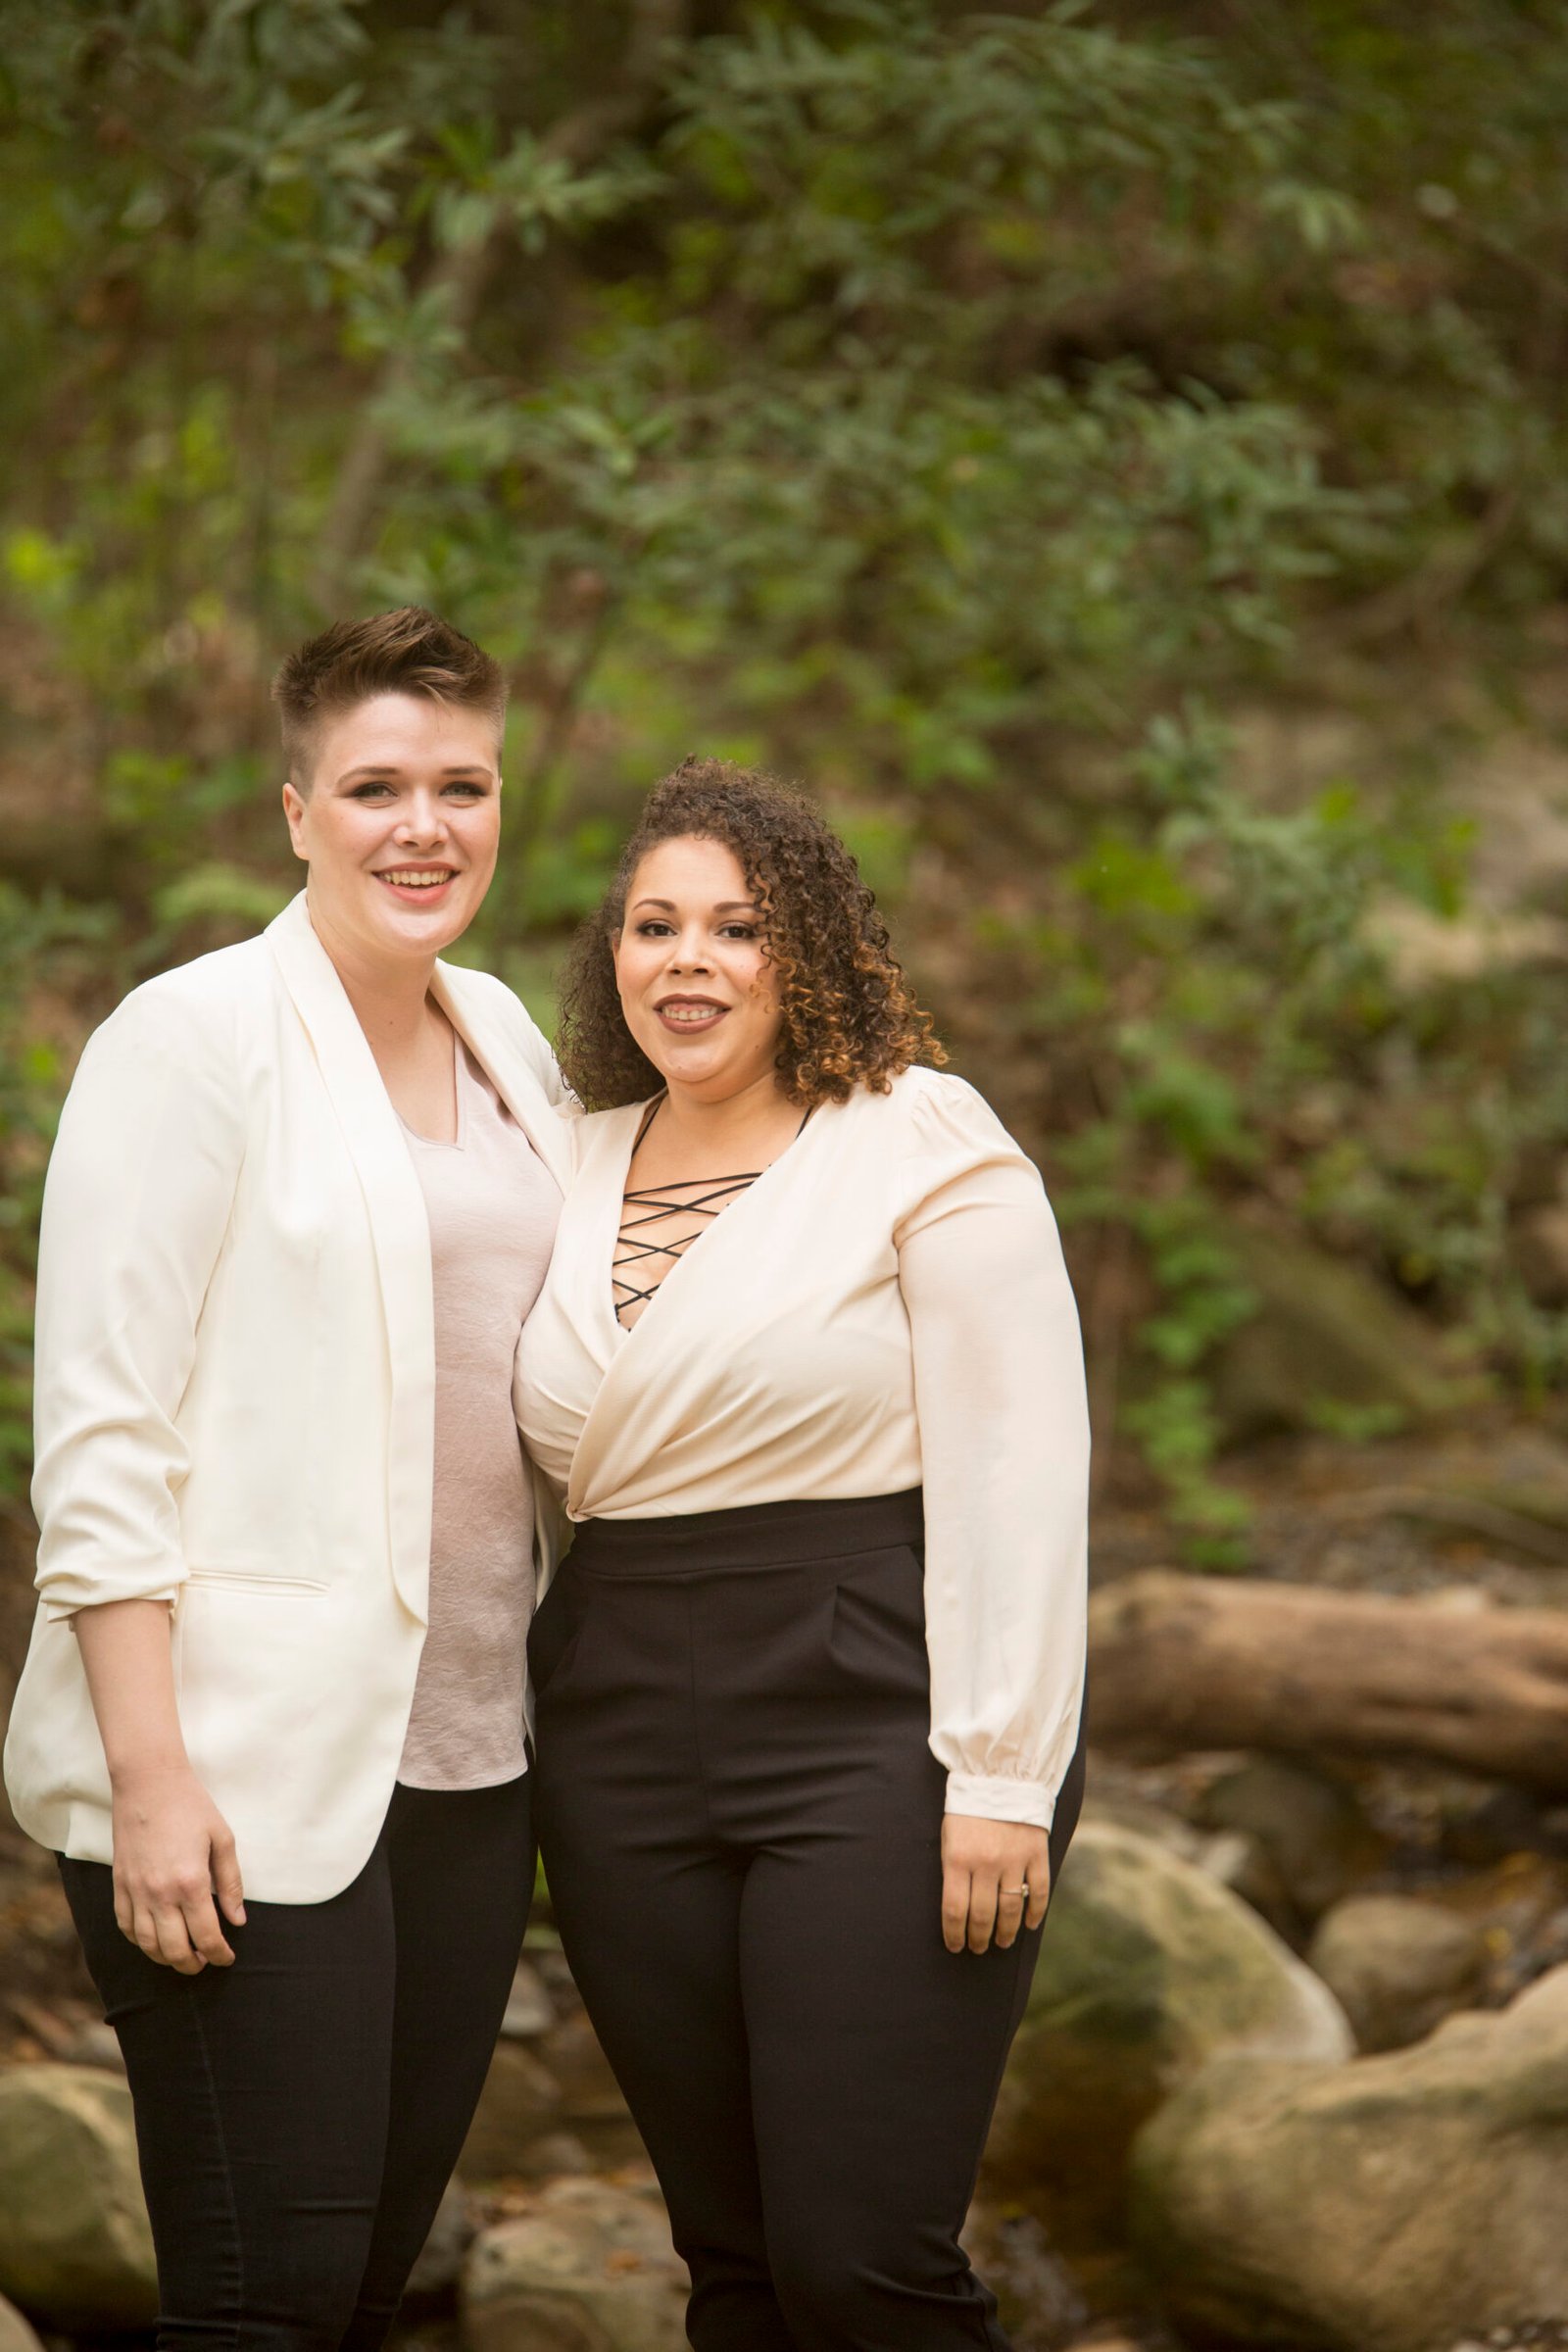 Engagement photo with two women in white shirts and black pants